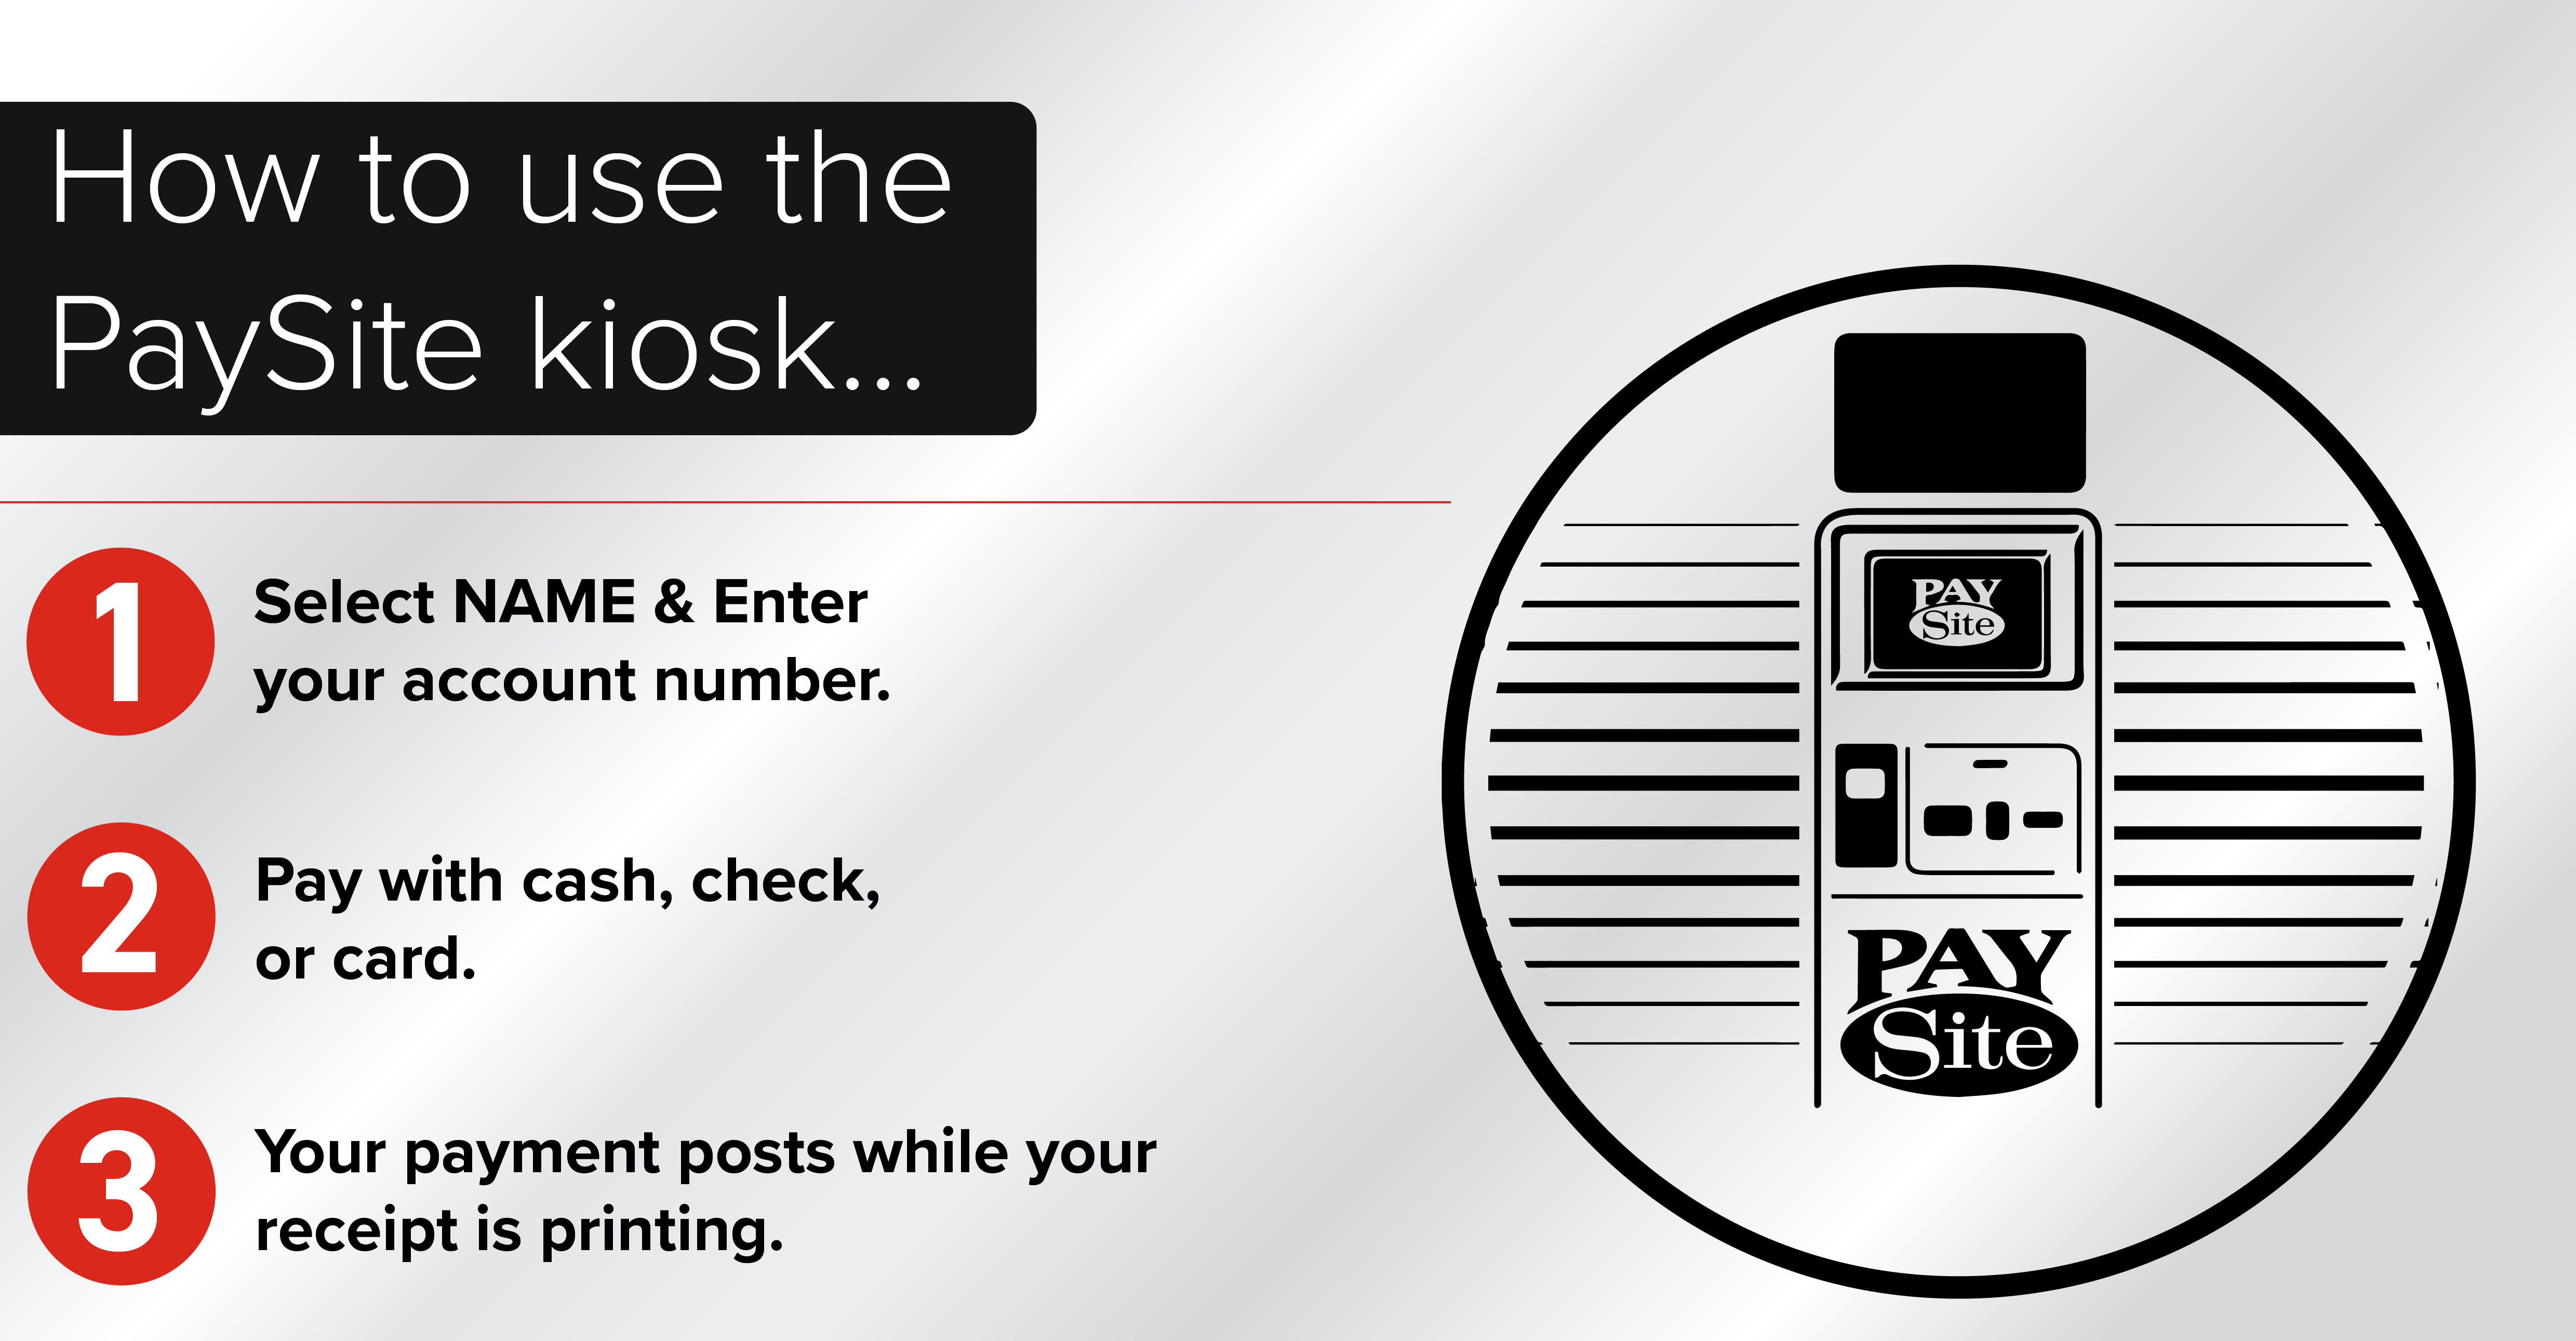 How to use the PaySite kiosk. 1. Select NAME & enter your account number. 2. Pay with cash, check, or card. #. Your payment posts while your receipt is printing.